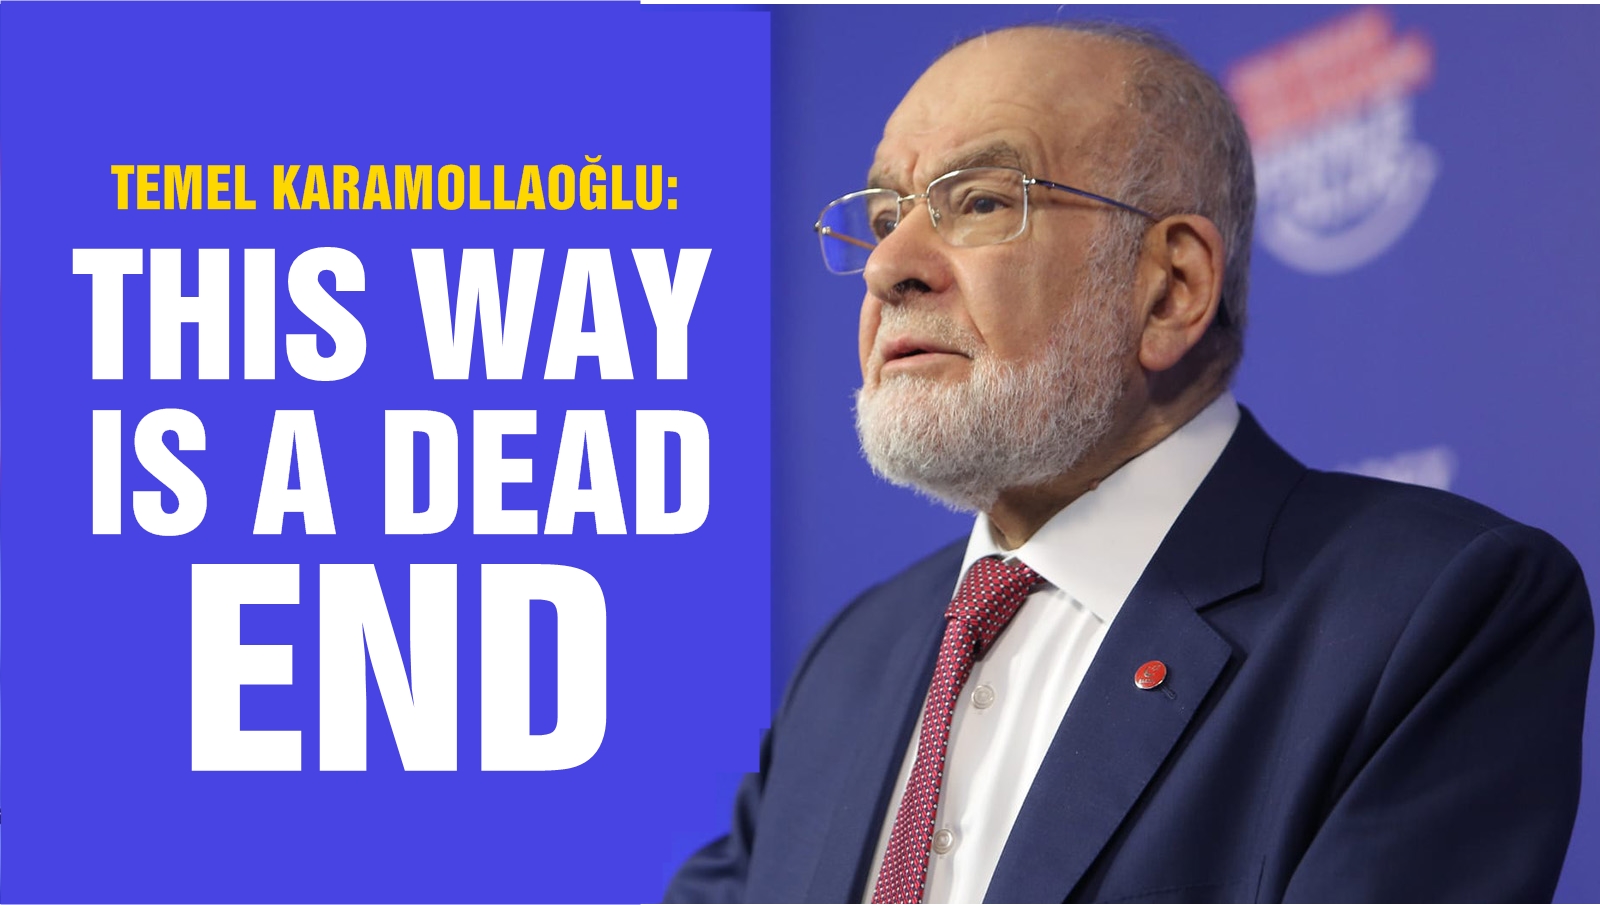 Saadet Party Leader Karamollaoglu: "This way is a dead end"